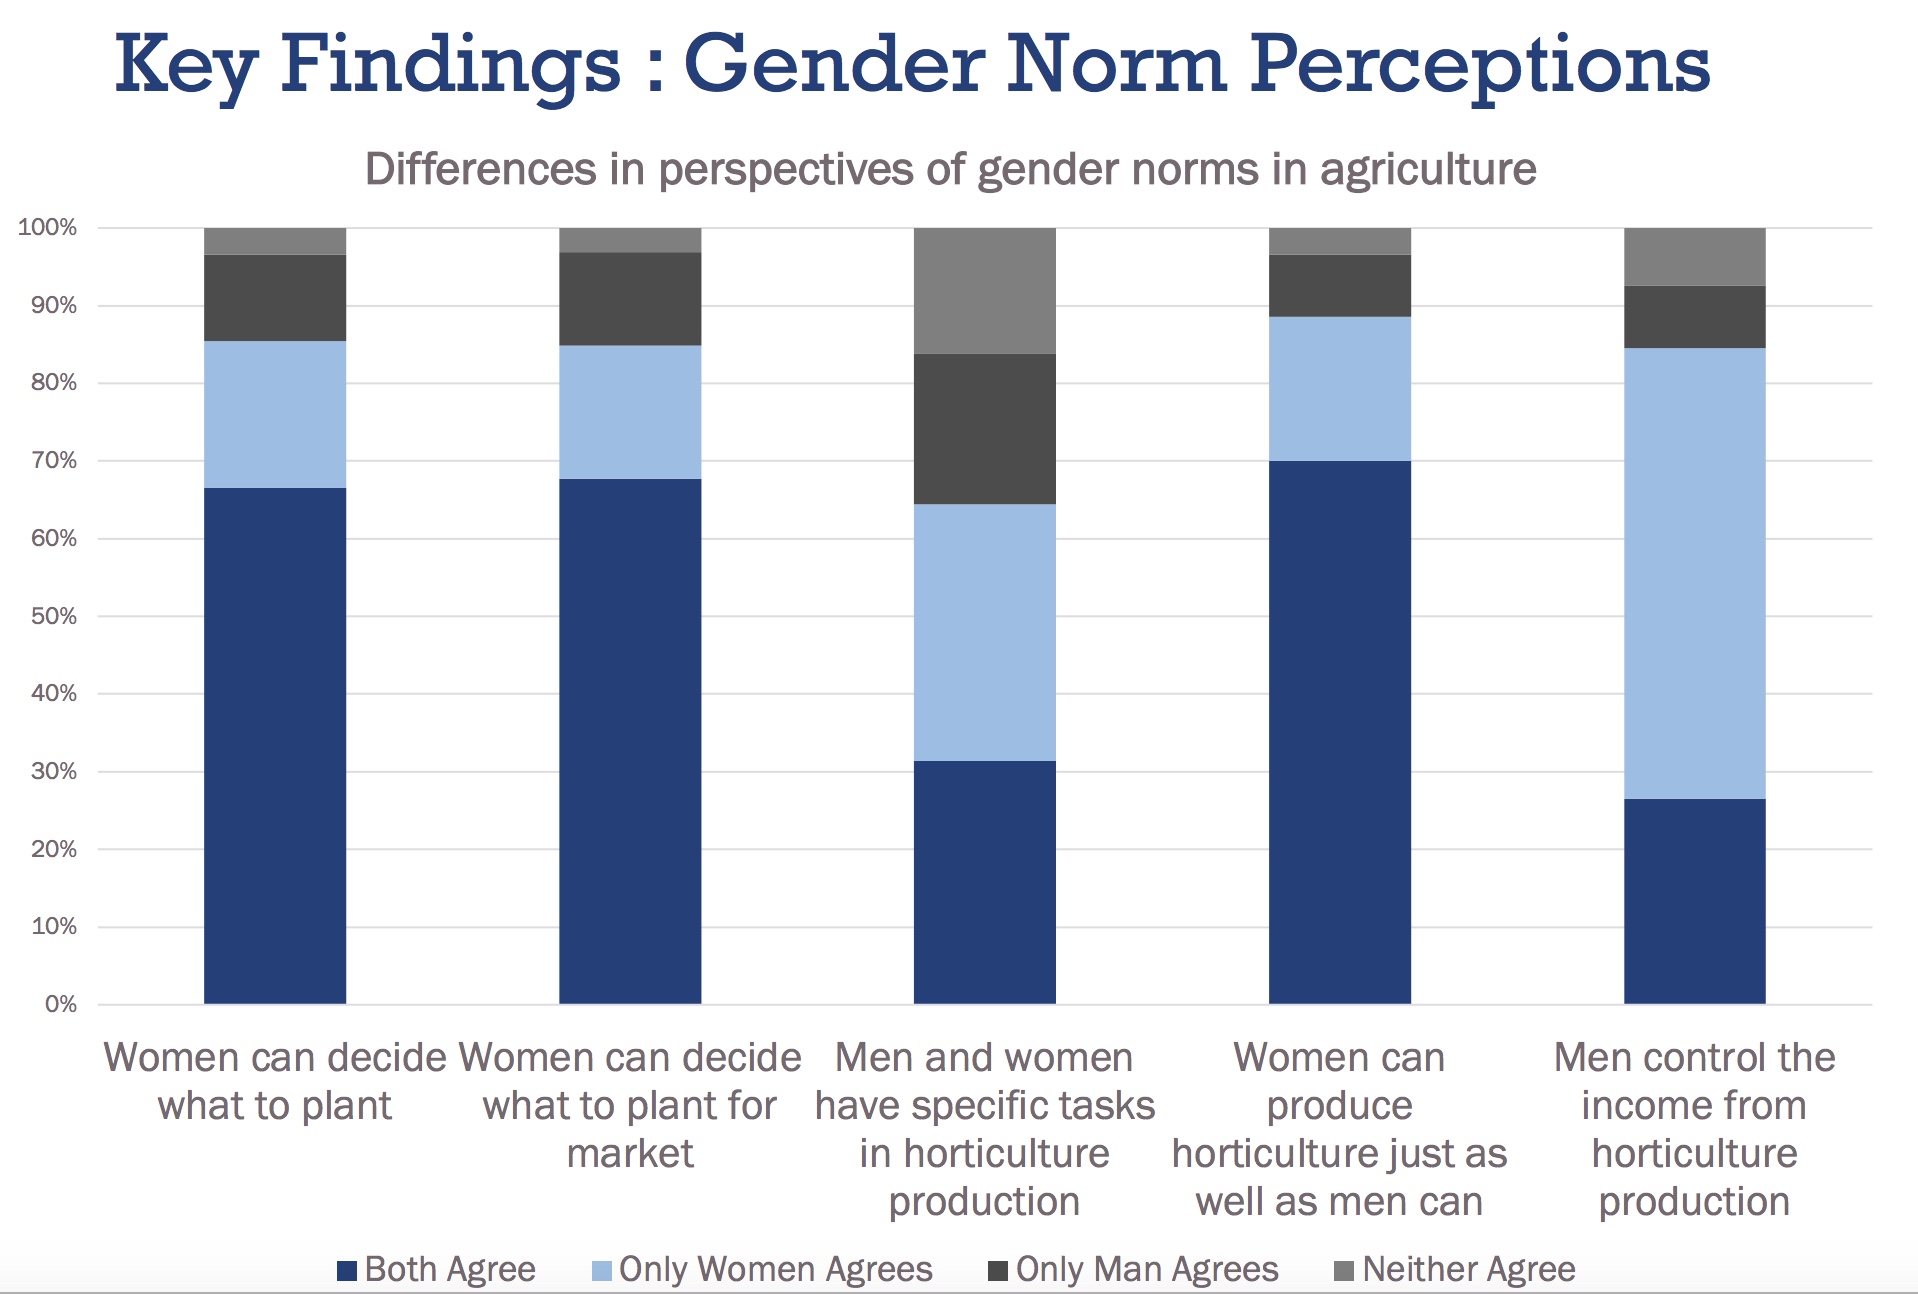 A bar graph depicting the key findings of how male and female partners perceive gender roles